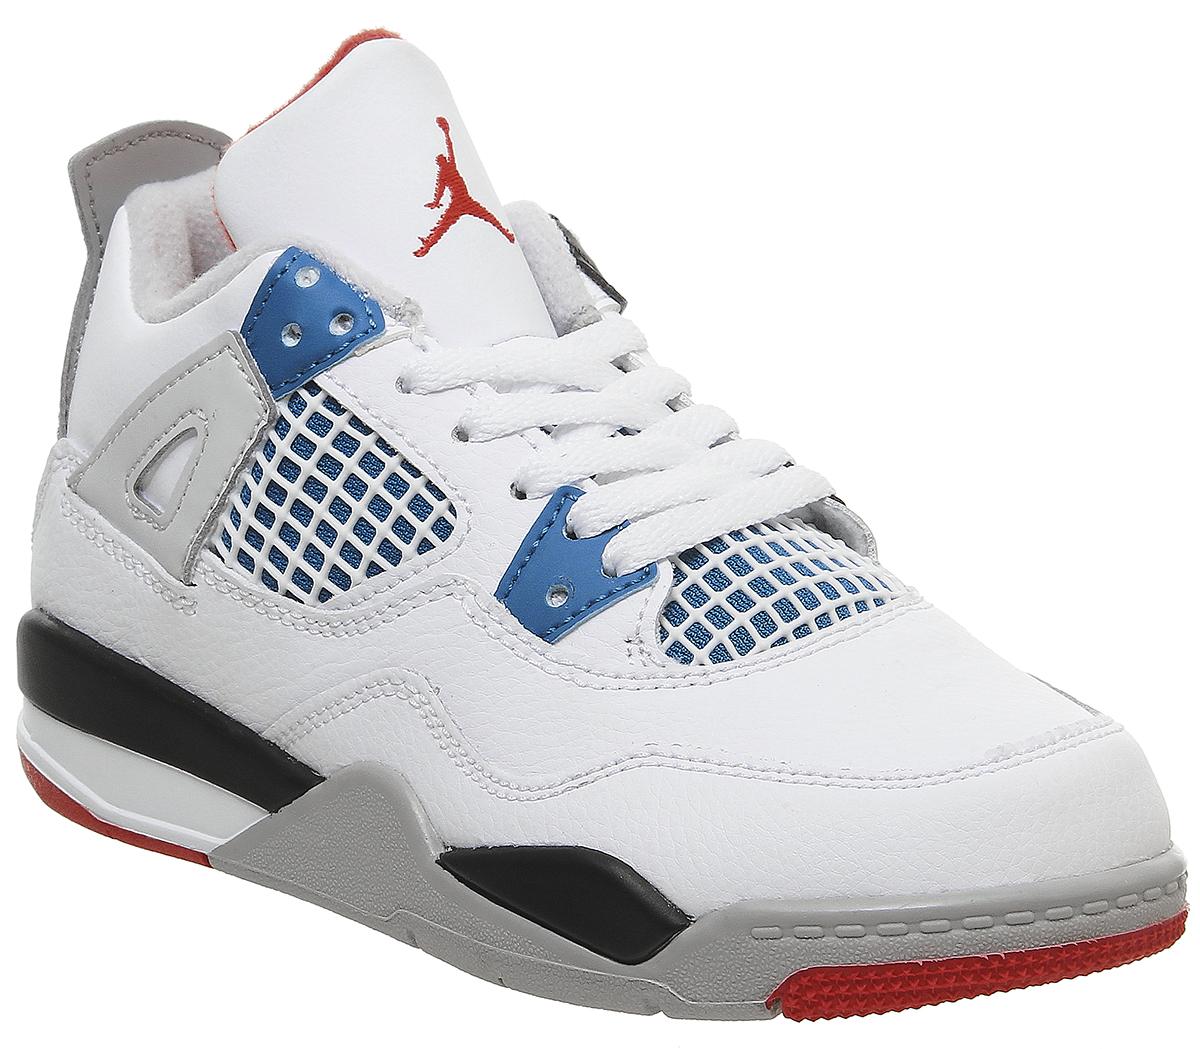 blue red and white jordan 4